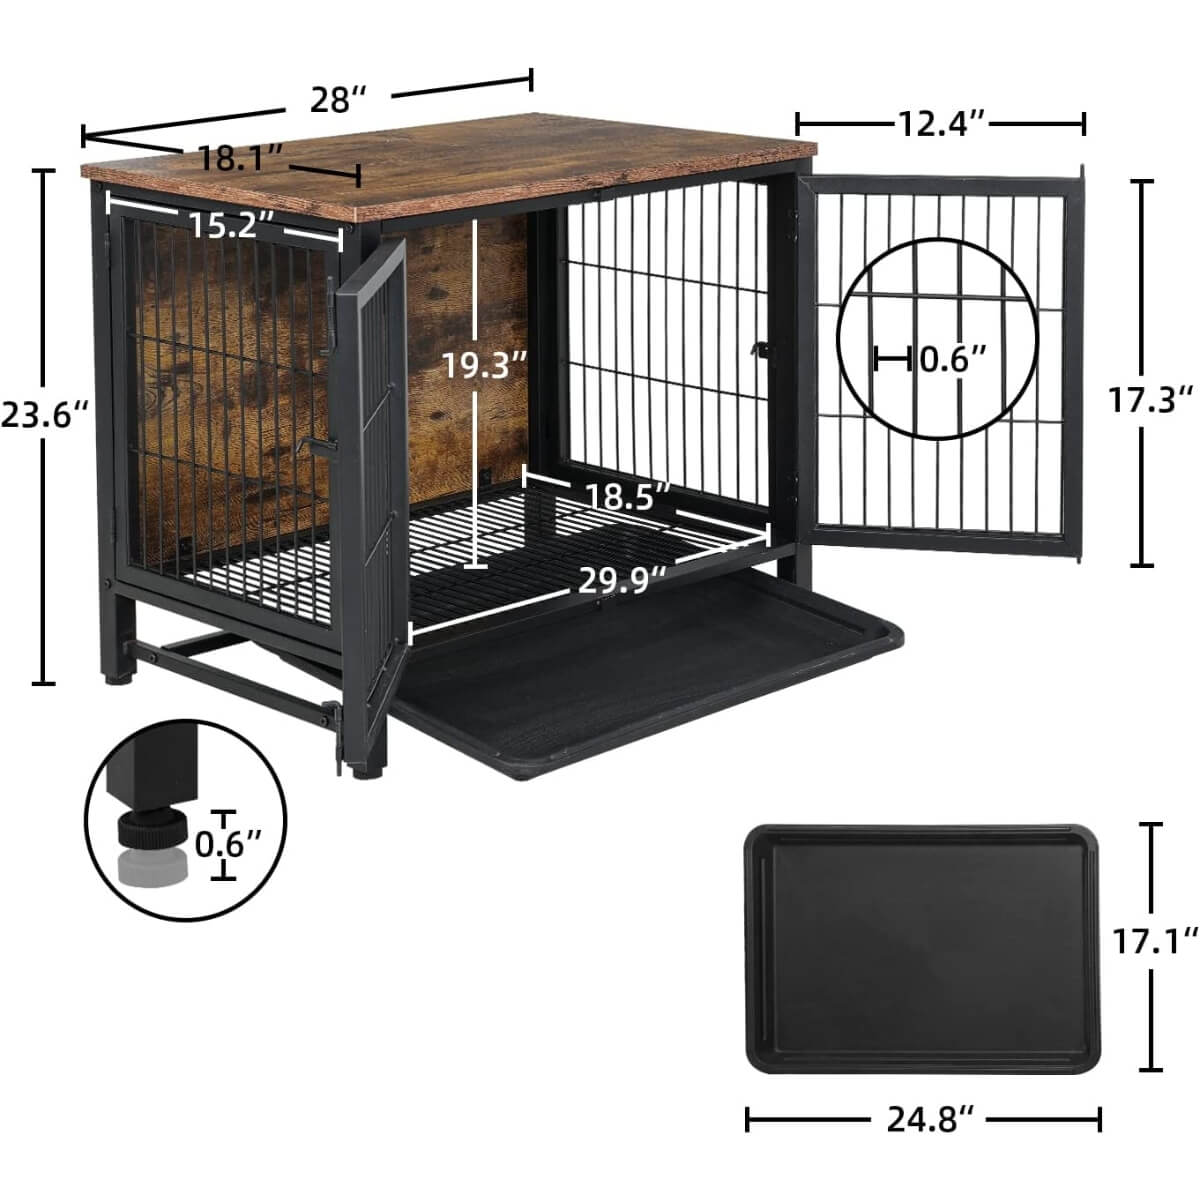 Size of small wooden dog crate furniture with tray 